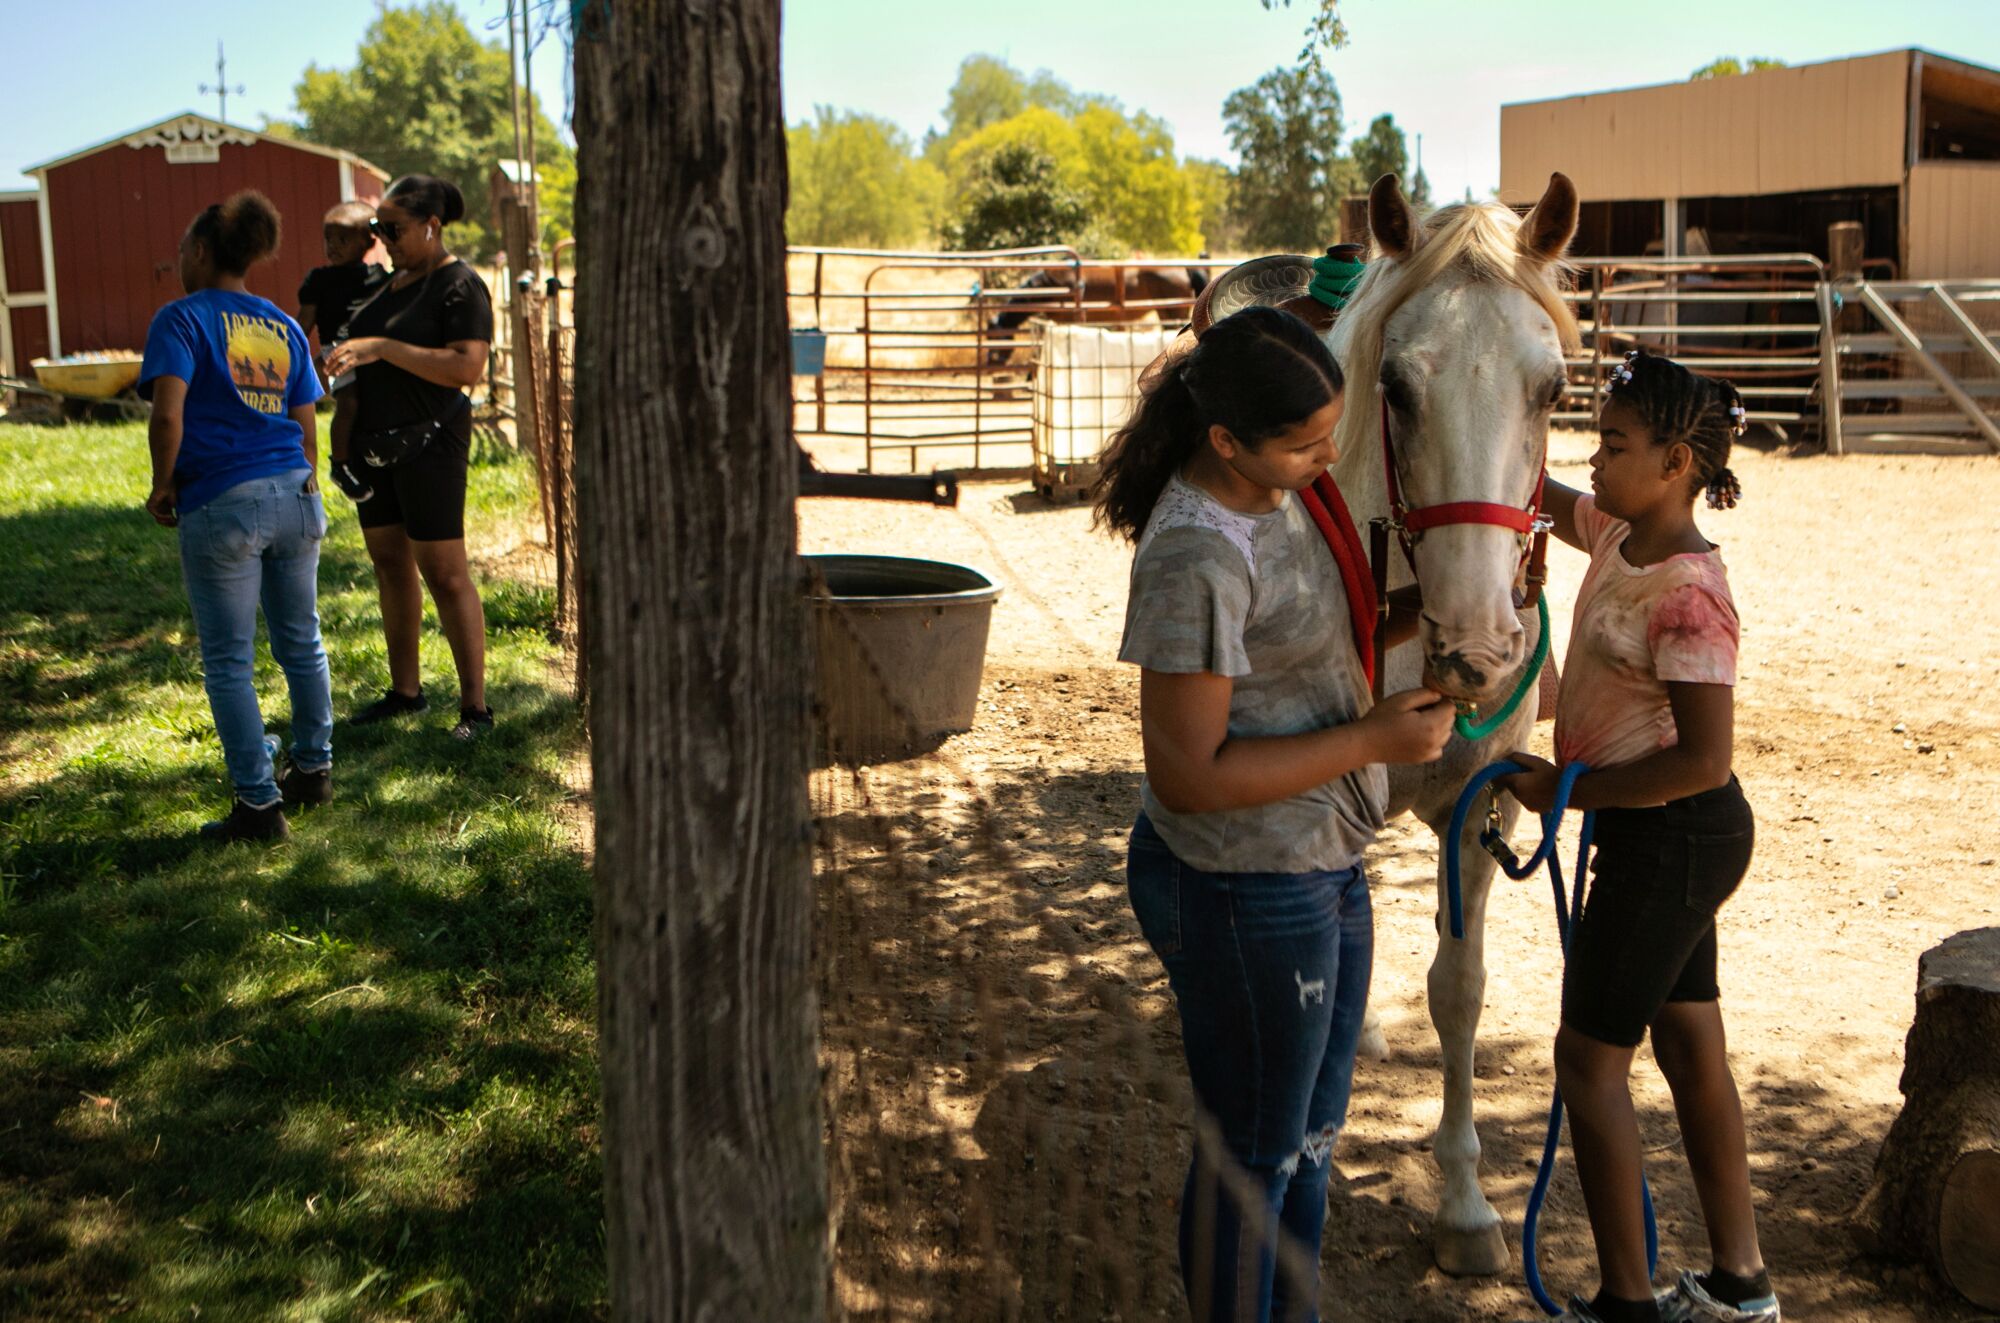 Two friends taking care of a horse in a corral as others stand and chat on the grass outside the enclosure